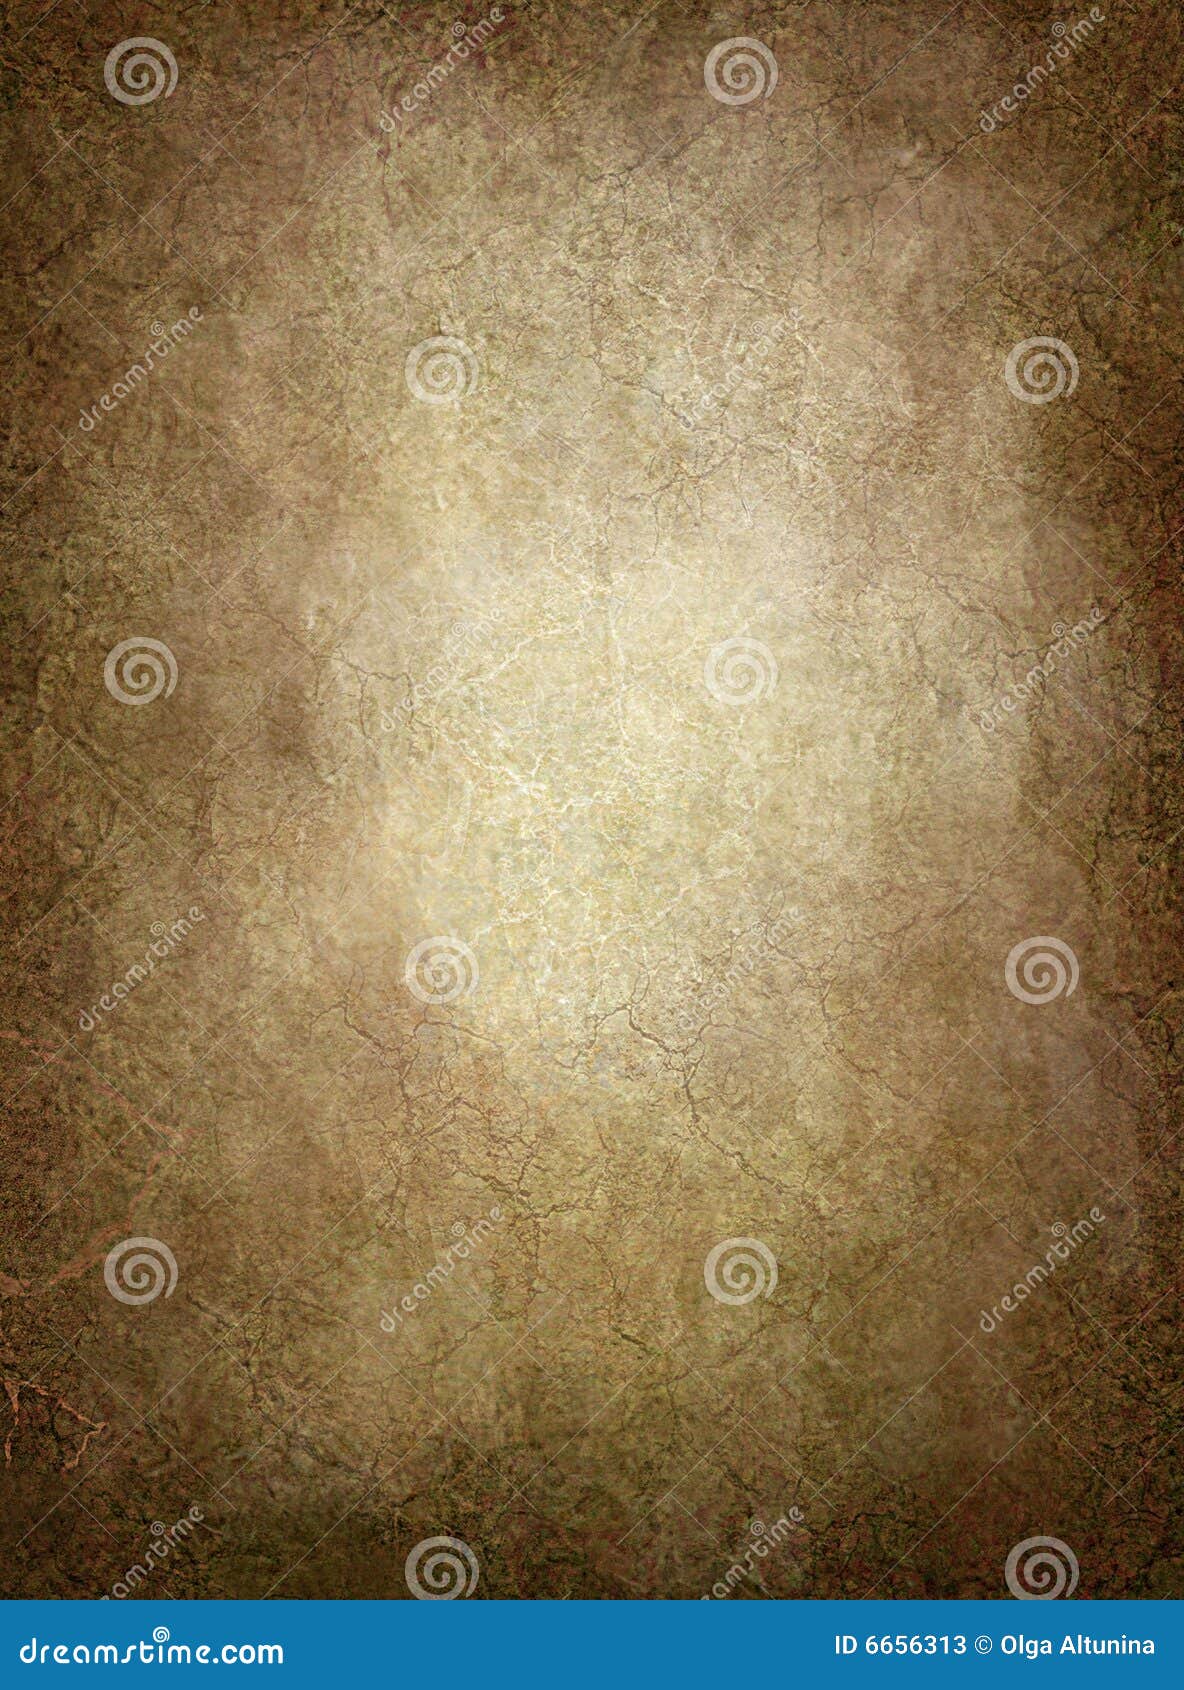 A portrait background stock image. Image of wall, document - 6656313